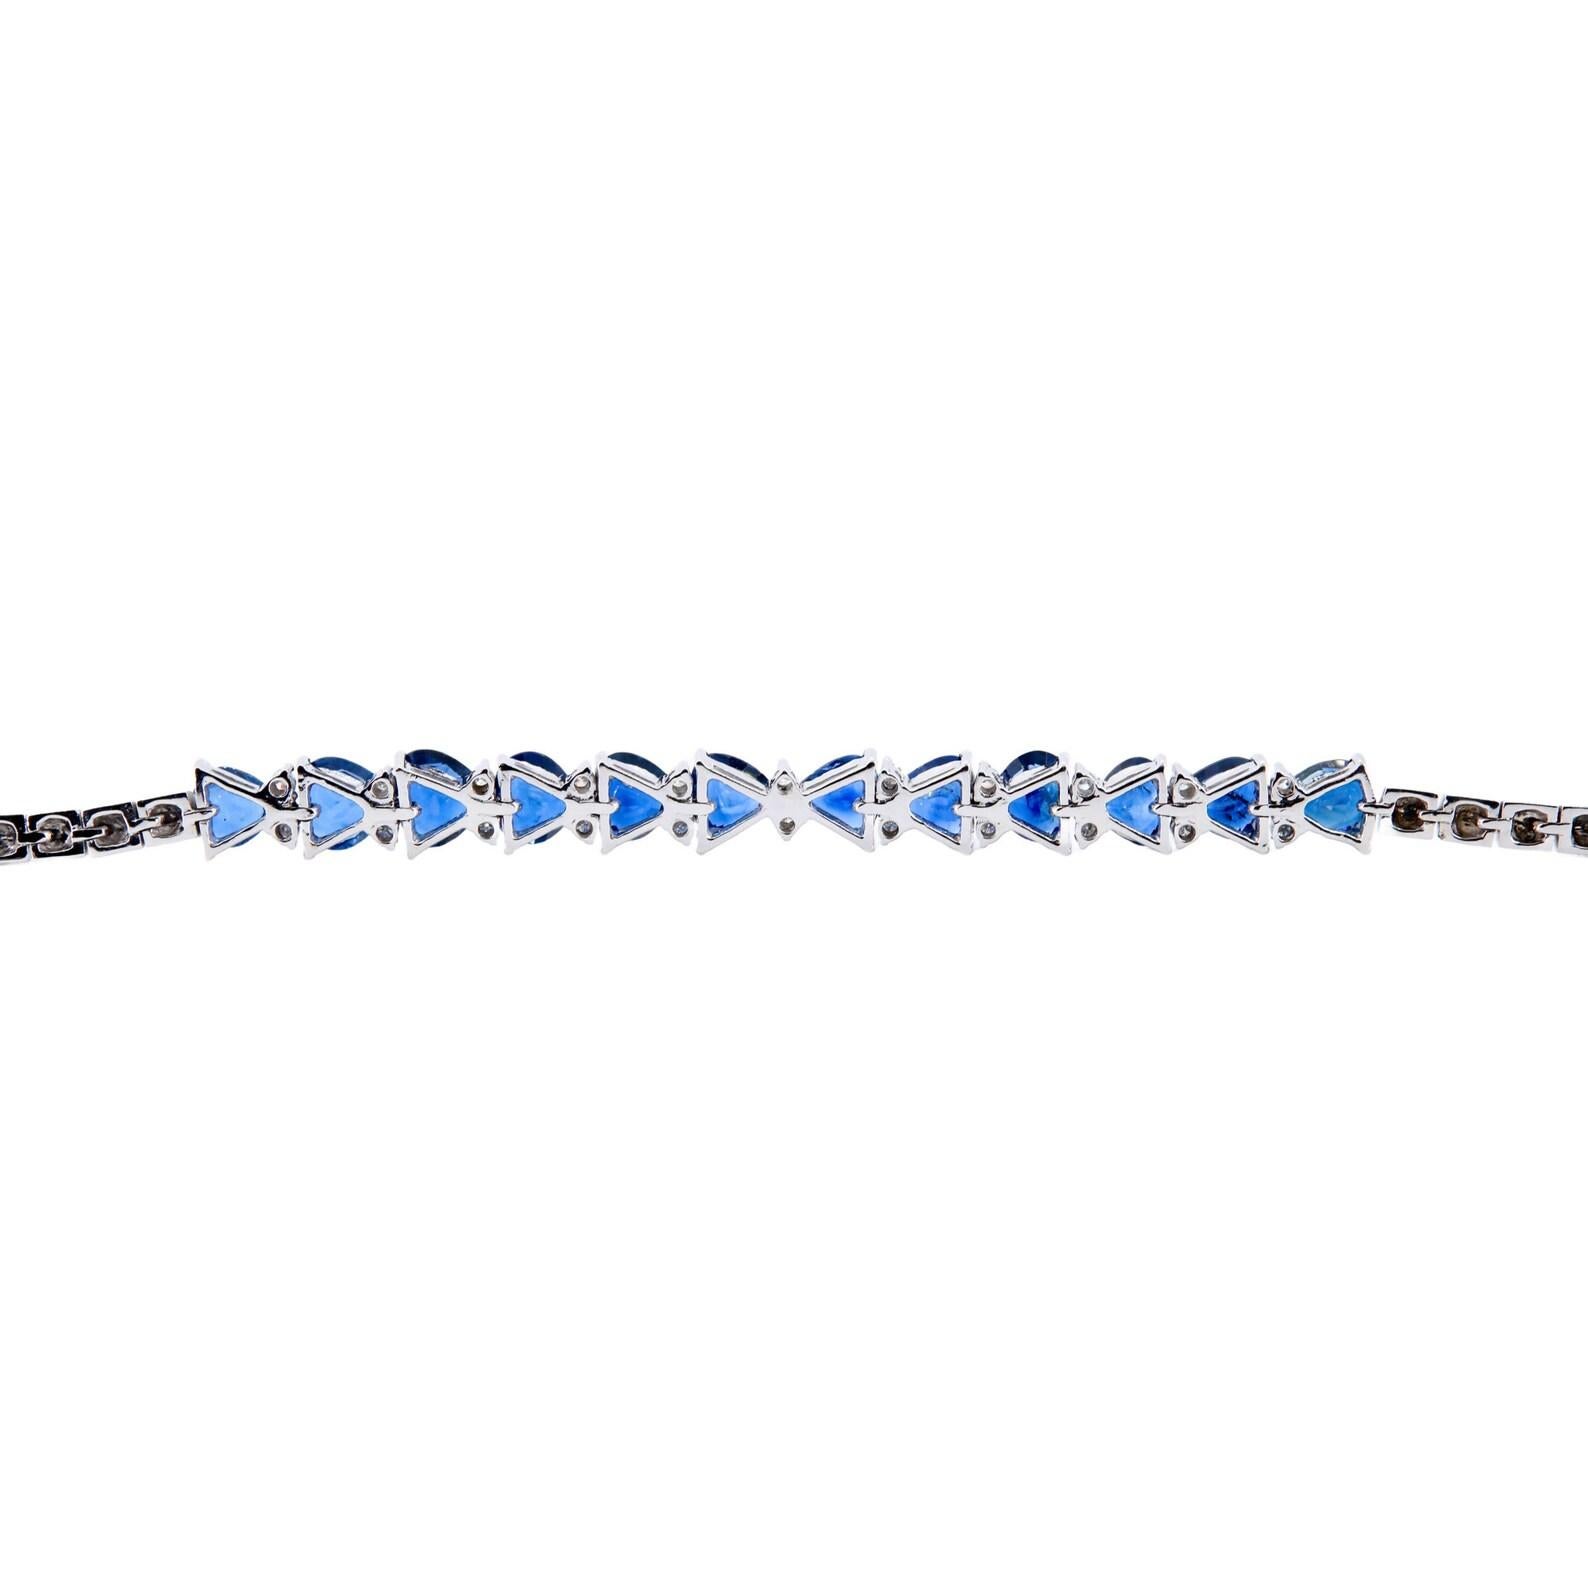 A vintage sapphire, and diamond line bracelet in 18 karat white gold. Set with a dozen rich blue heart shaped sapphires, and accented with brilliant cut white diamonds. 

Weighing 12.00ctw, the sapphires are of rich vivid blue color with superior